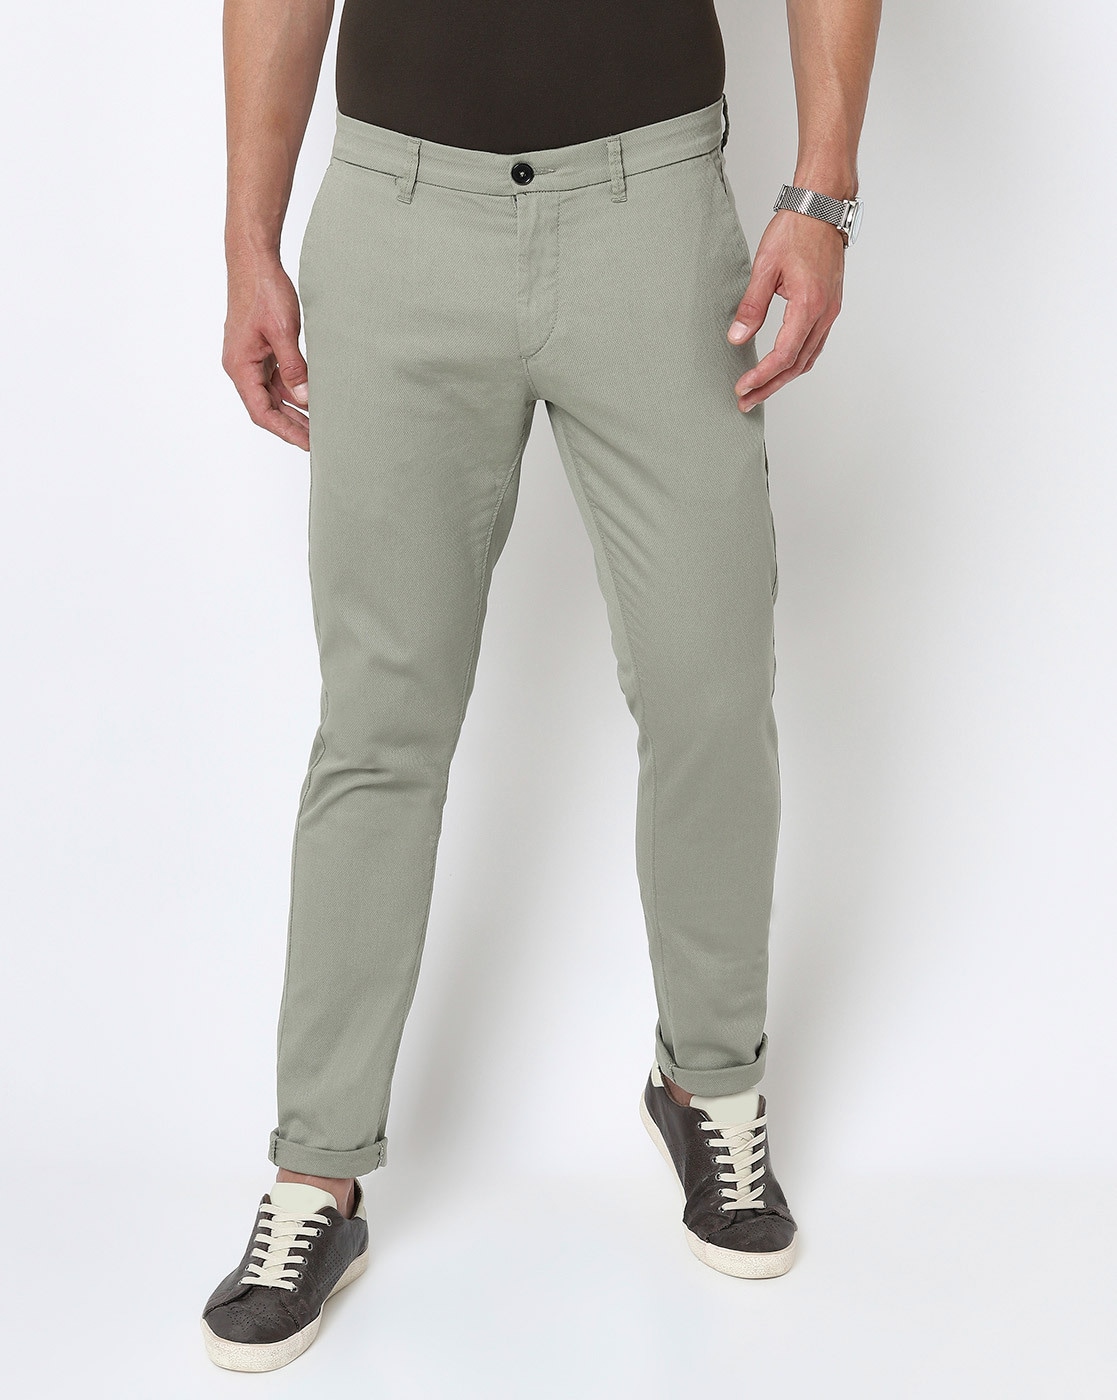 U.S. POLO ASSN. Solid Men Multicolor Track Pants - Buy U.S. POLO ASSN.  Solid Men Multicolor Track Pants Online at Best Prices in India |  Flipkart.com